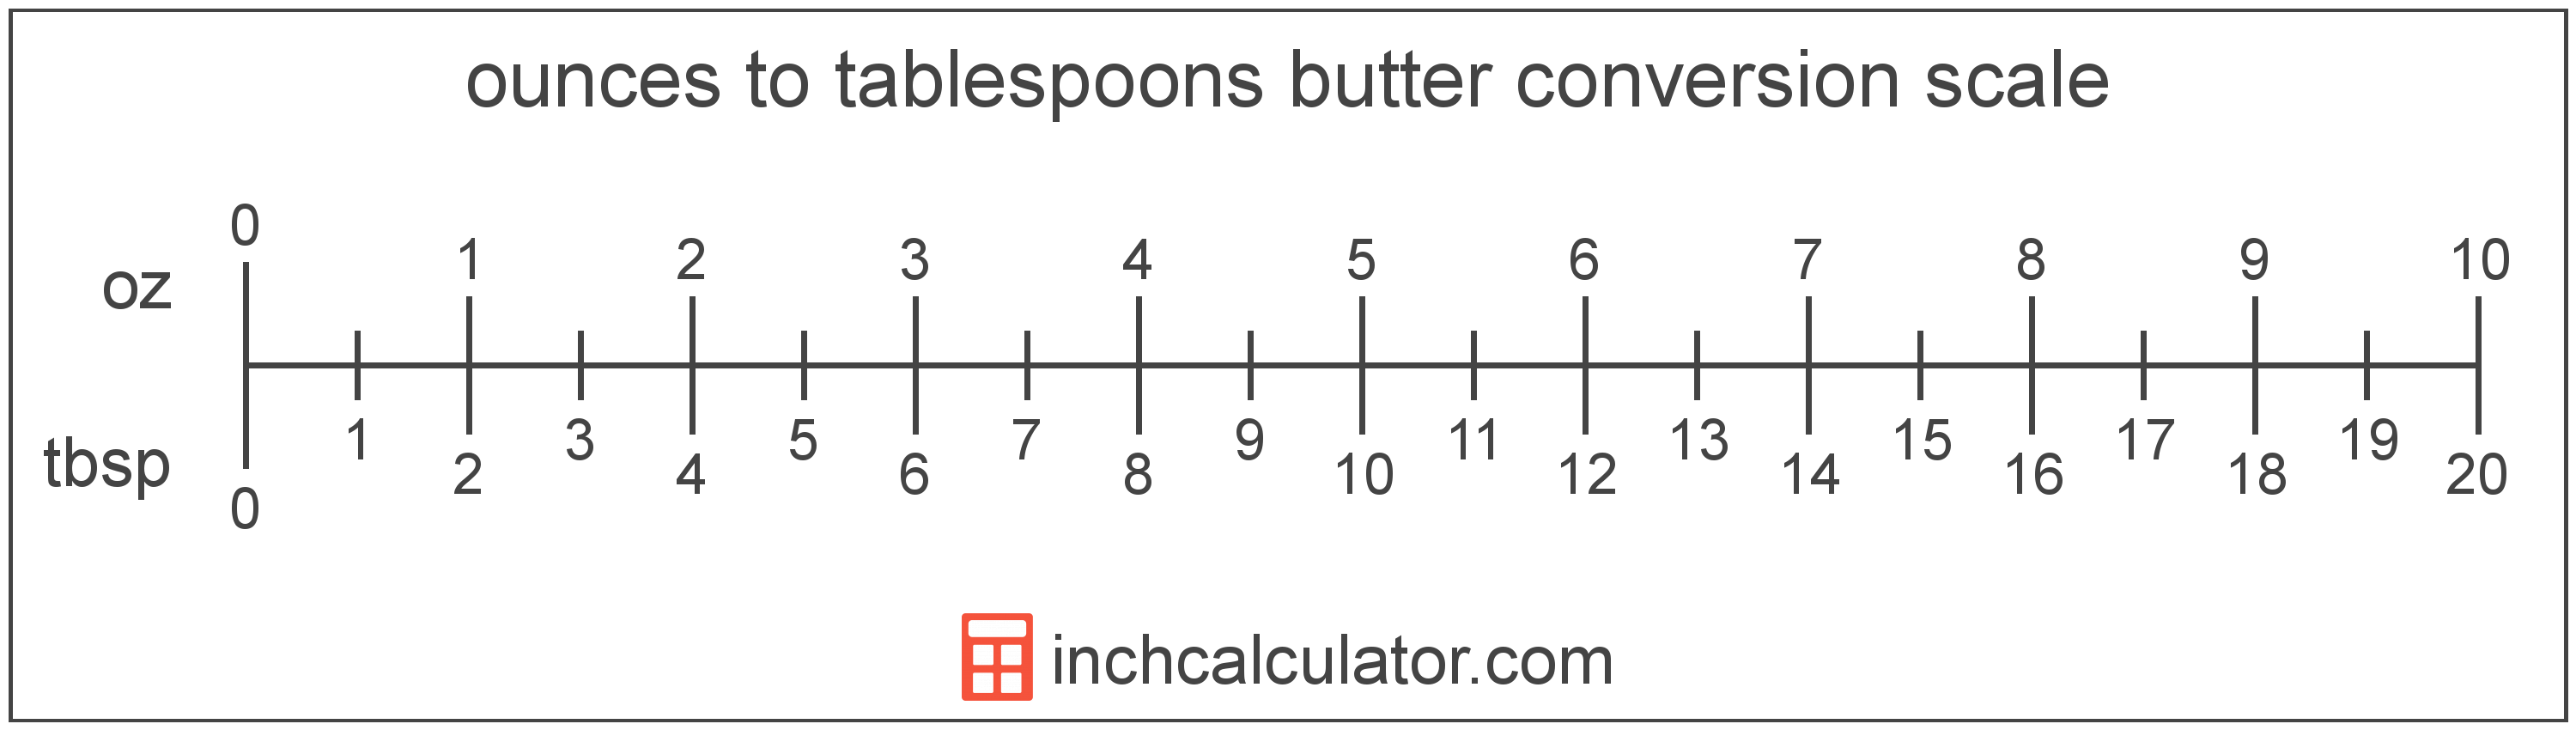 conversion scale showing ounces and equivalent tablespoons butter values